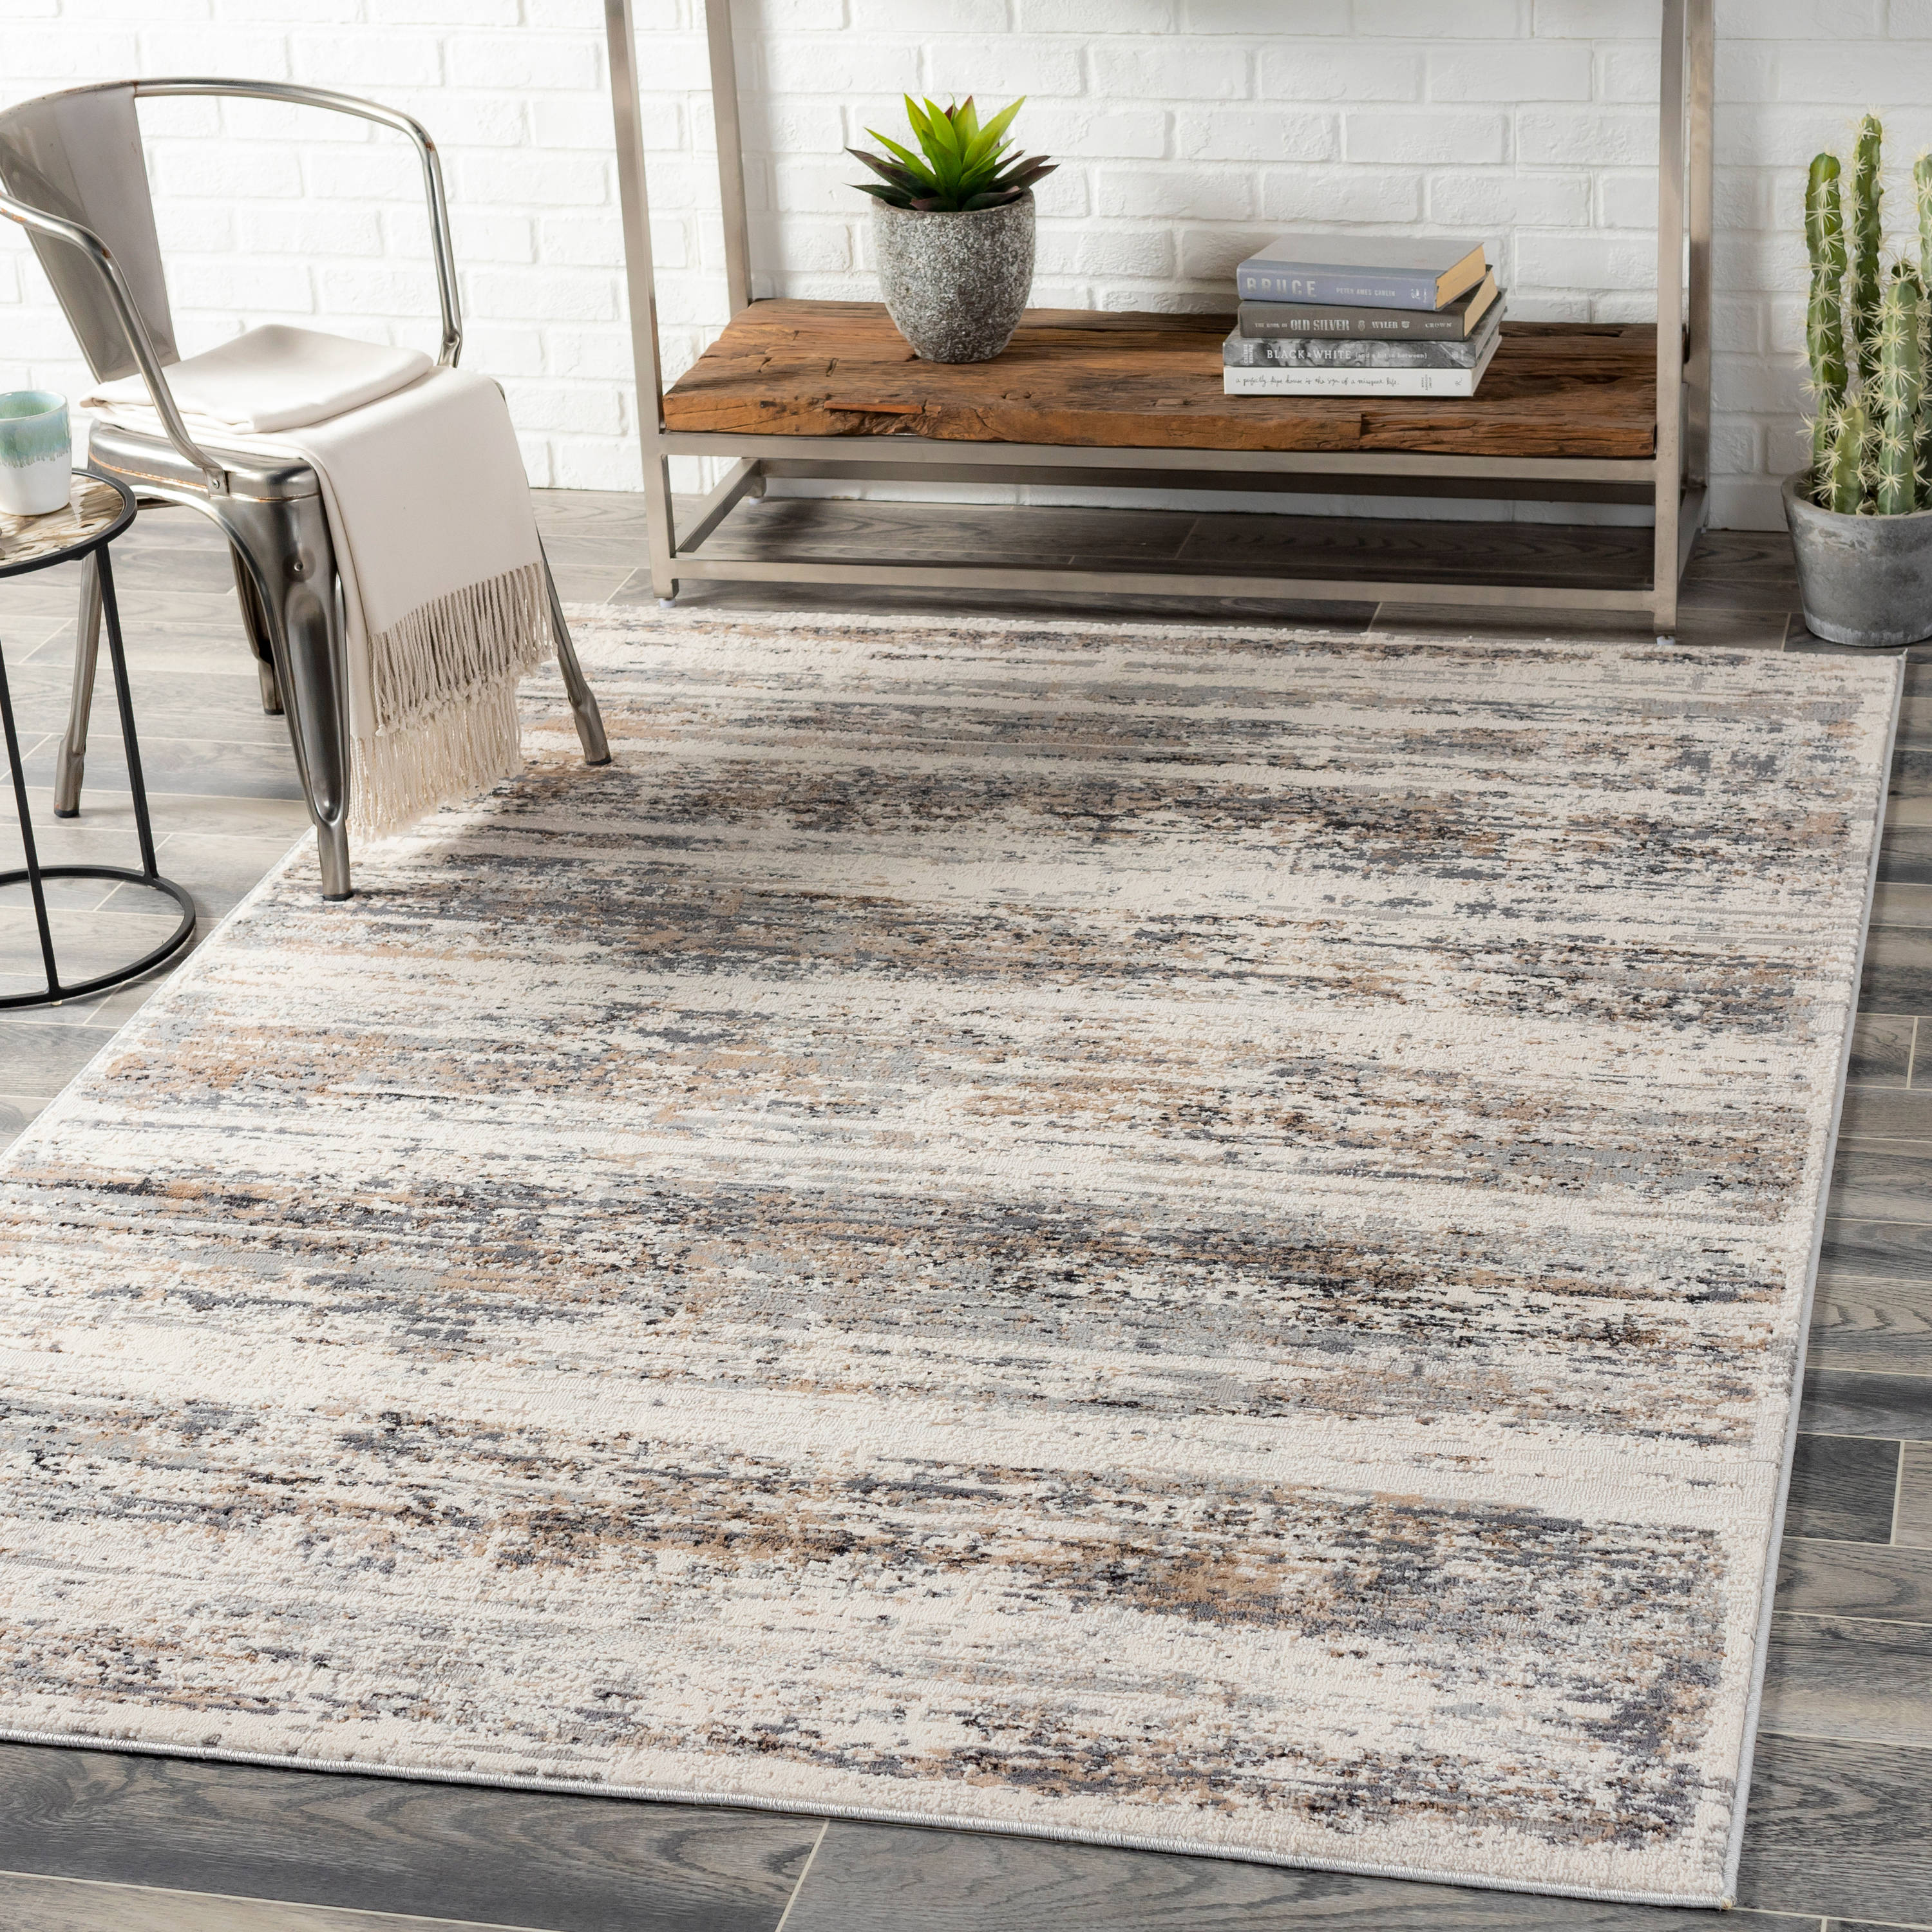 Whitewash Abstract Rug Light Camel Industrial Rug Polyester Washable  Anti-Slip Backing Carpet for Living Room